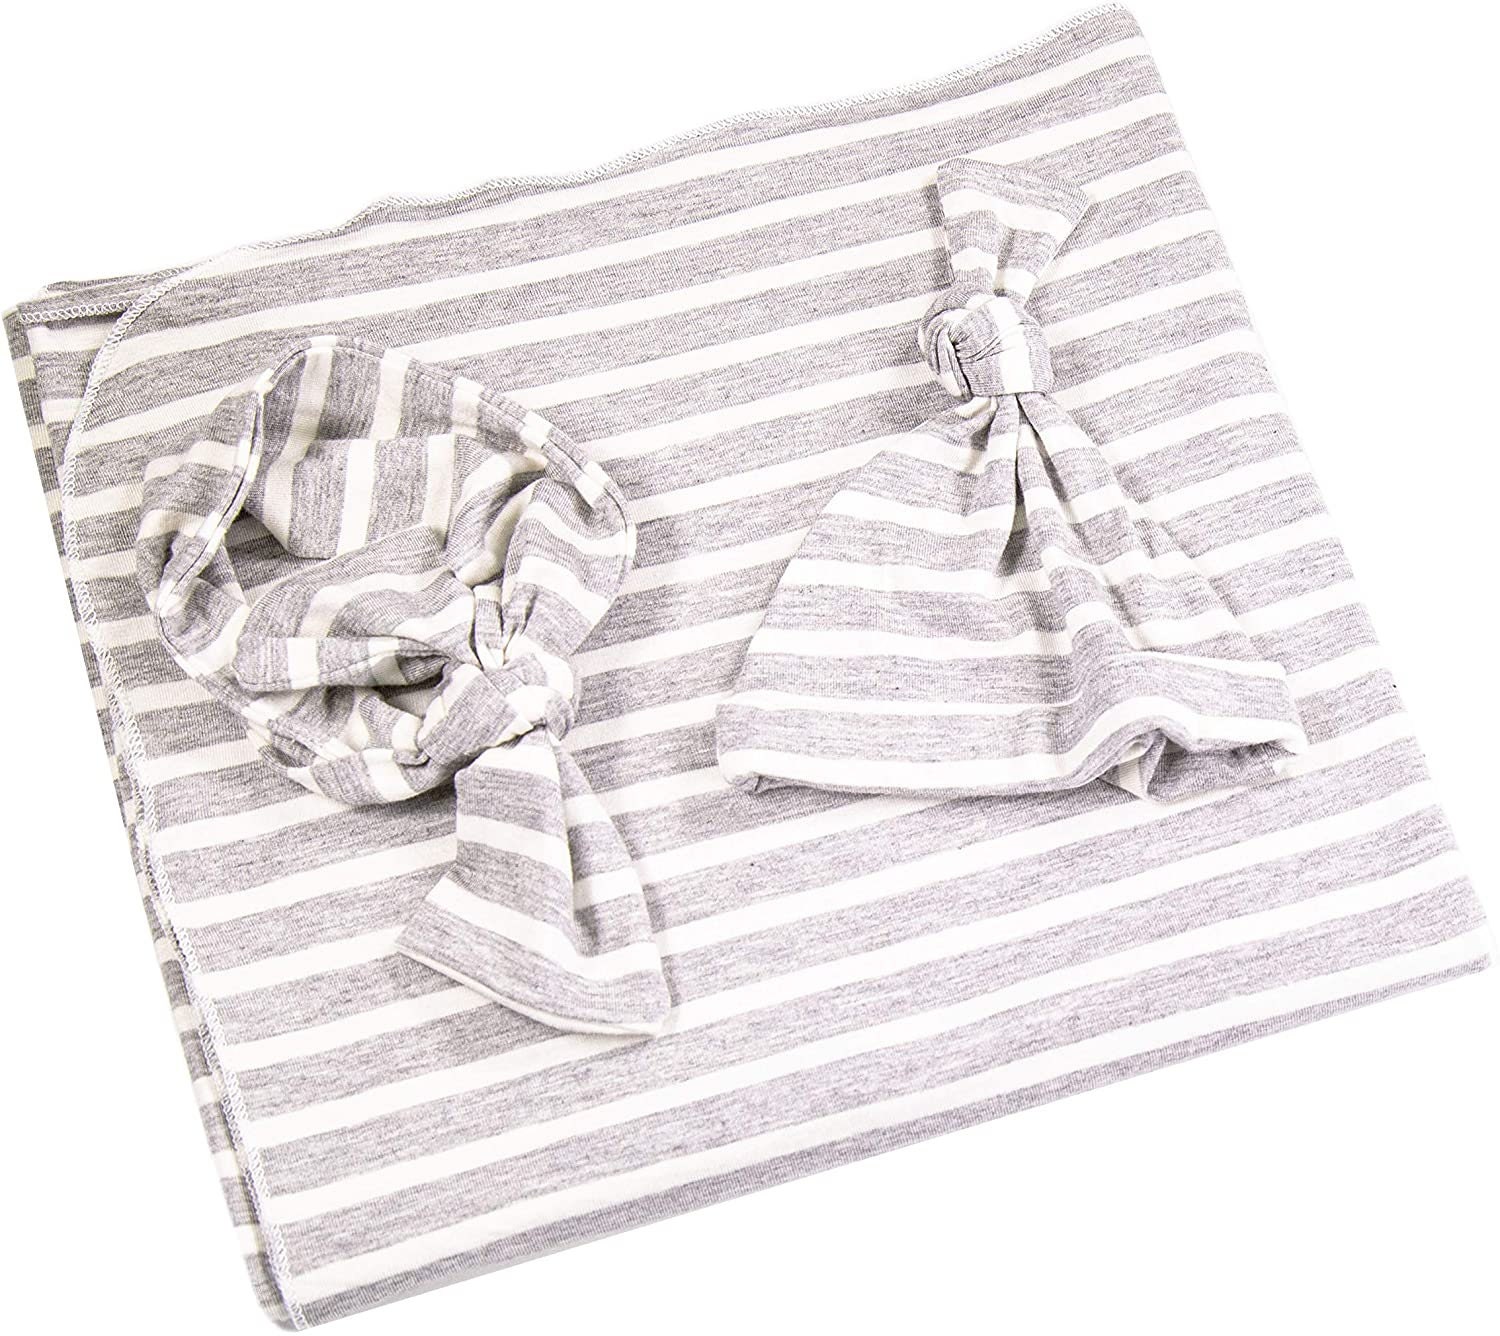 BabyOdda Coming Home Swaddle Set for New Born Baby's Includes Receiving Blanket 3 Piece, Off White & Black Stripes 